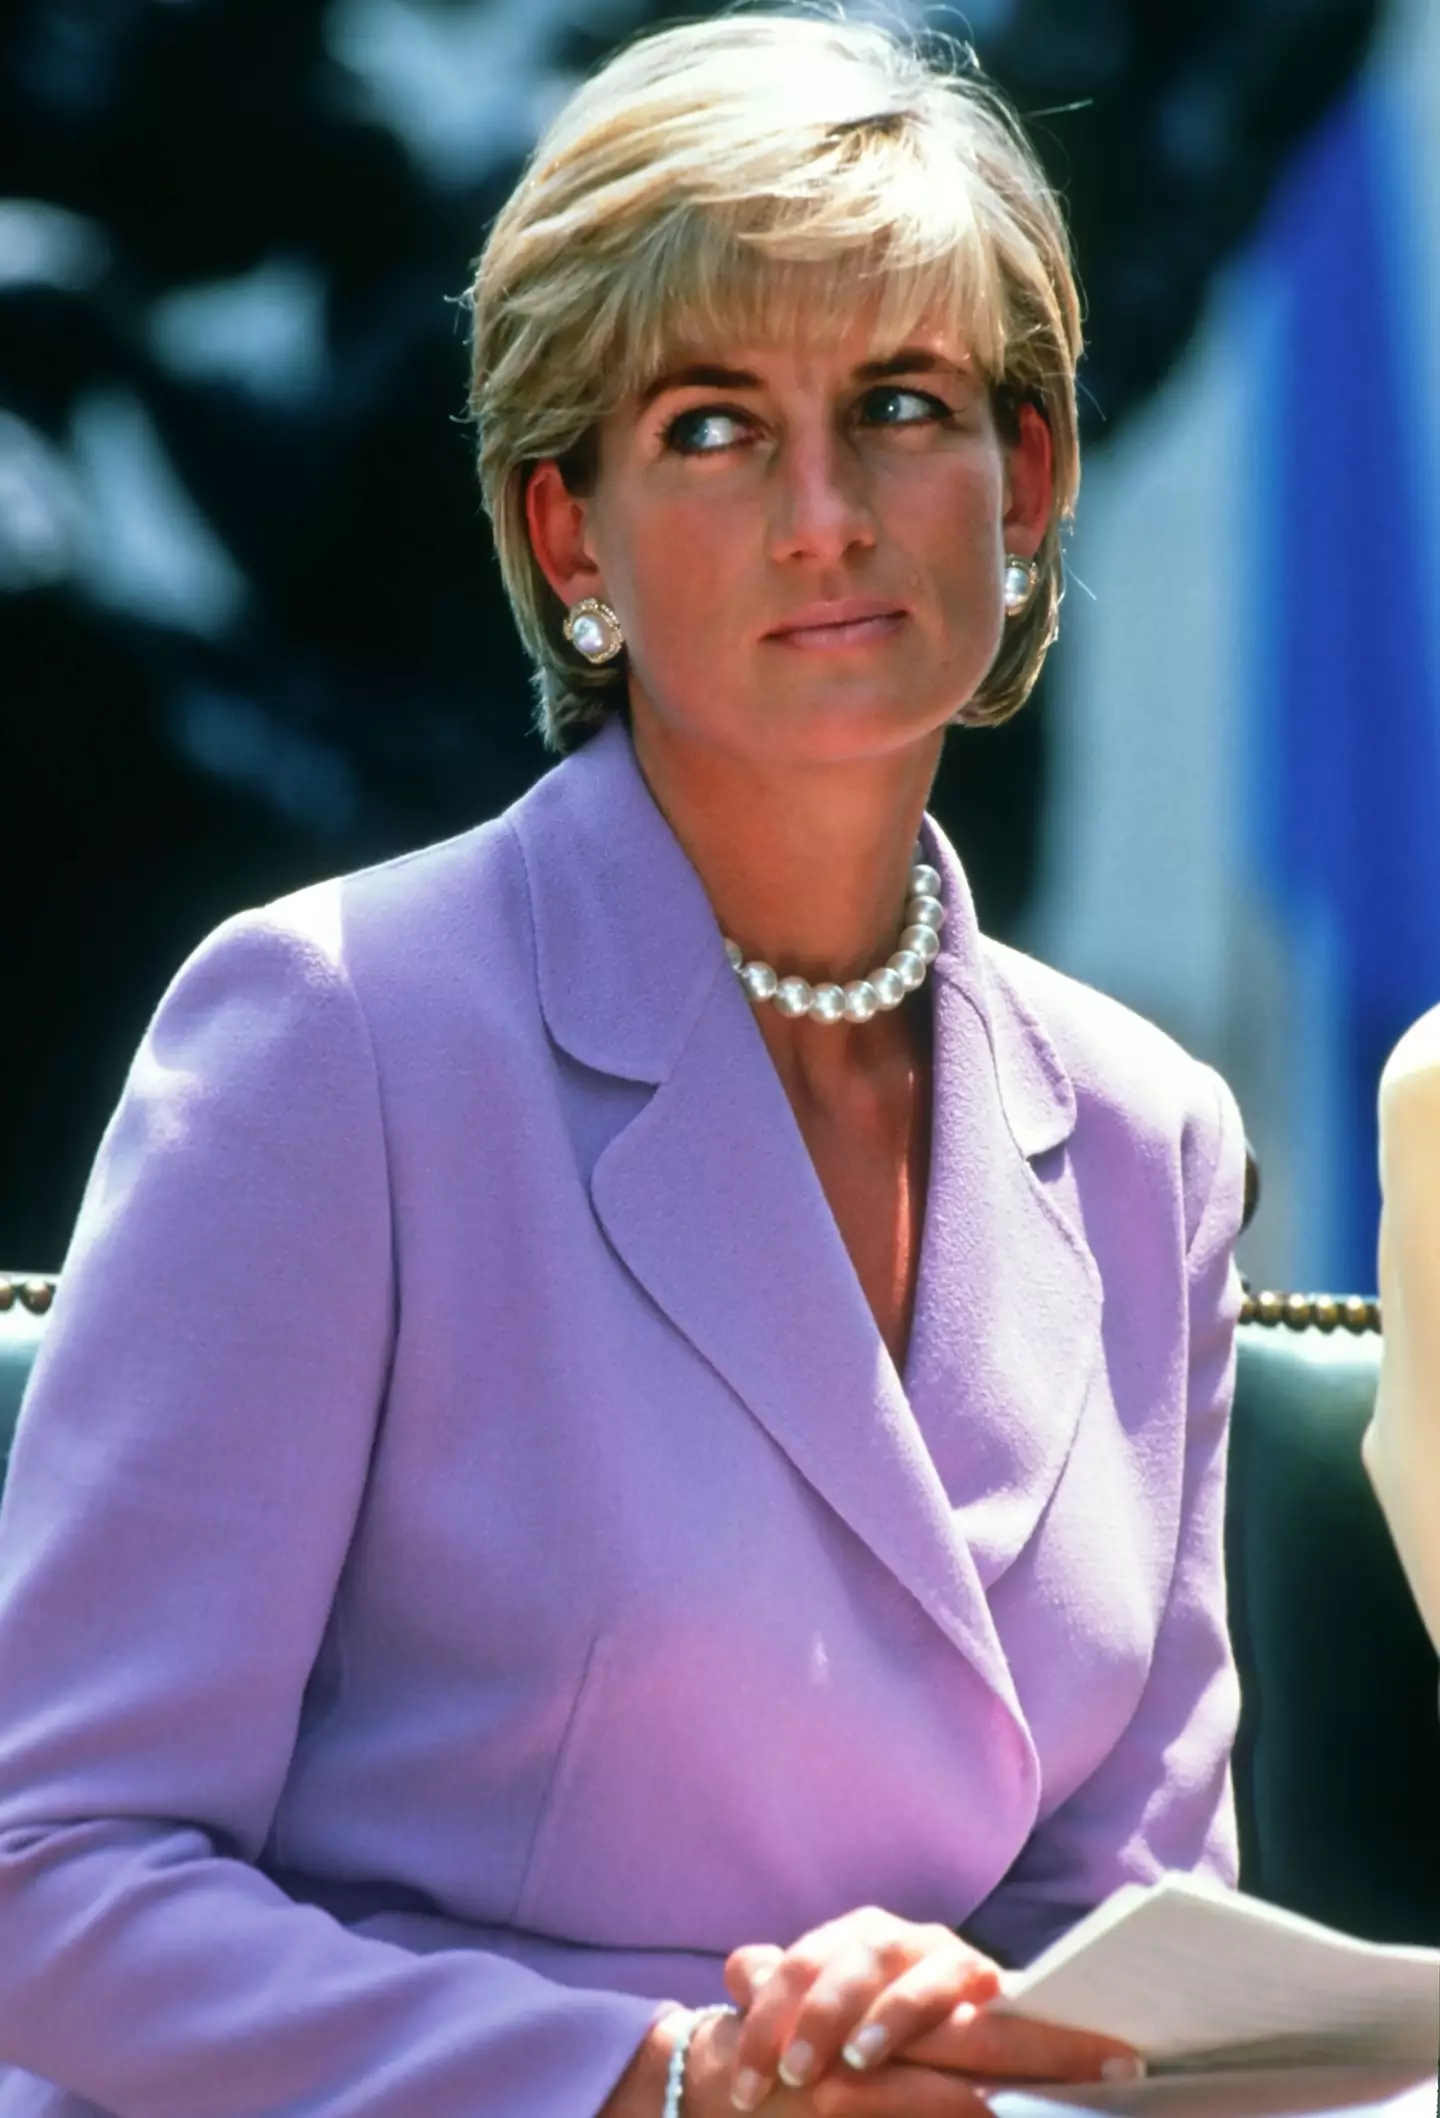 Princess Diana may have foreseen her own cause of death years before she actually died.